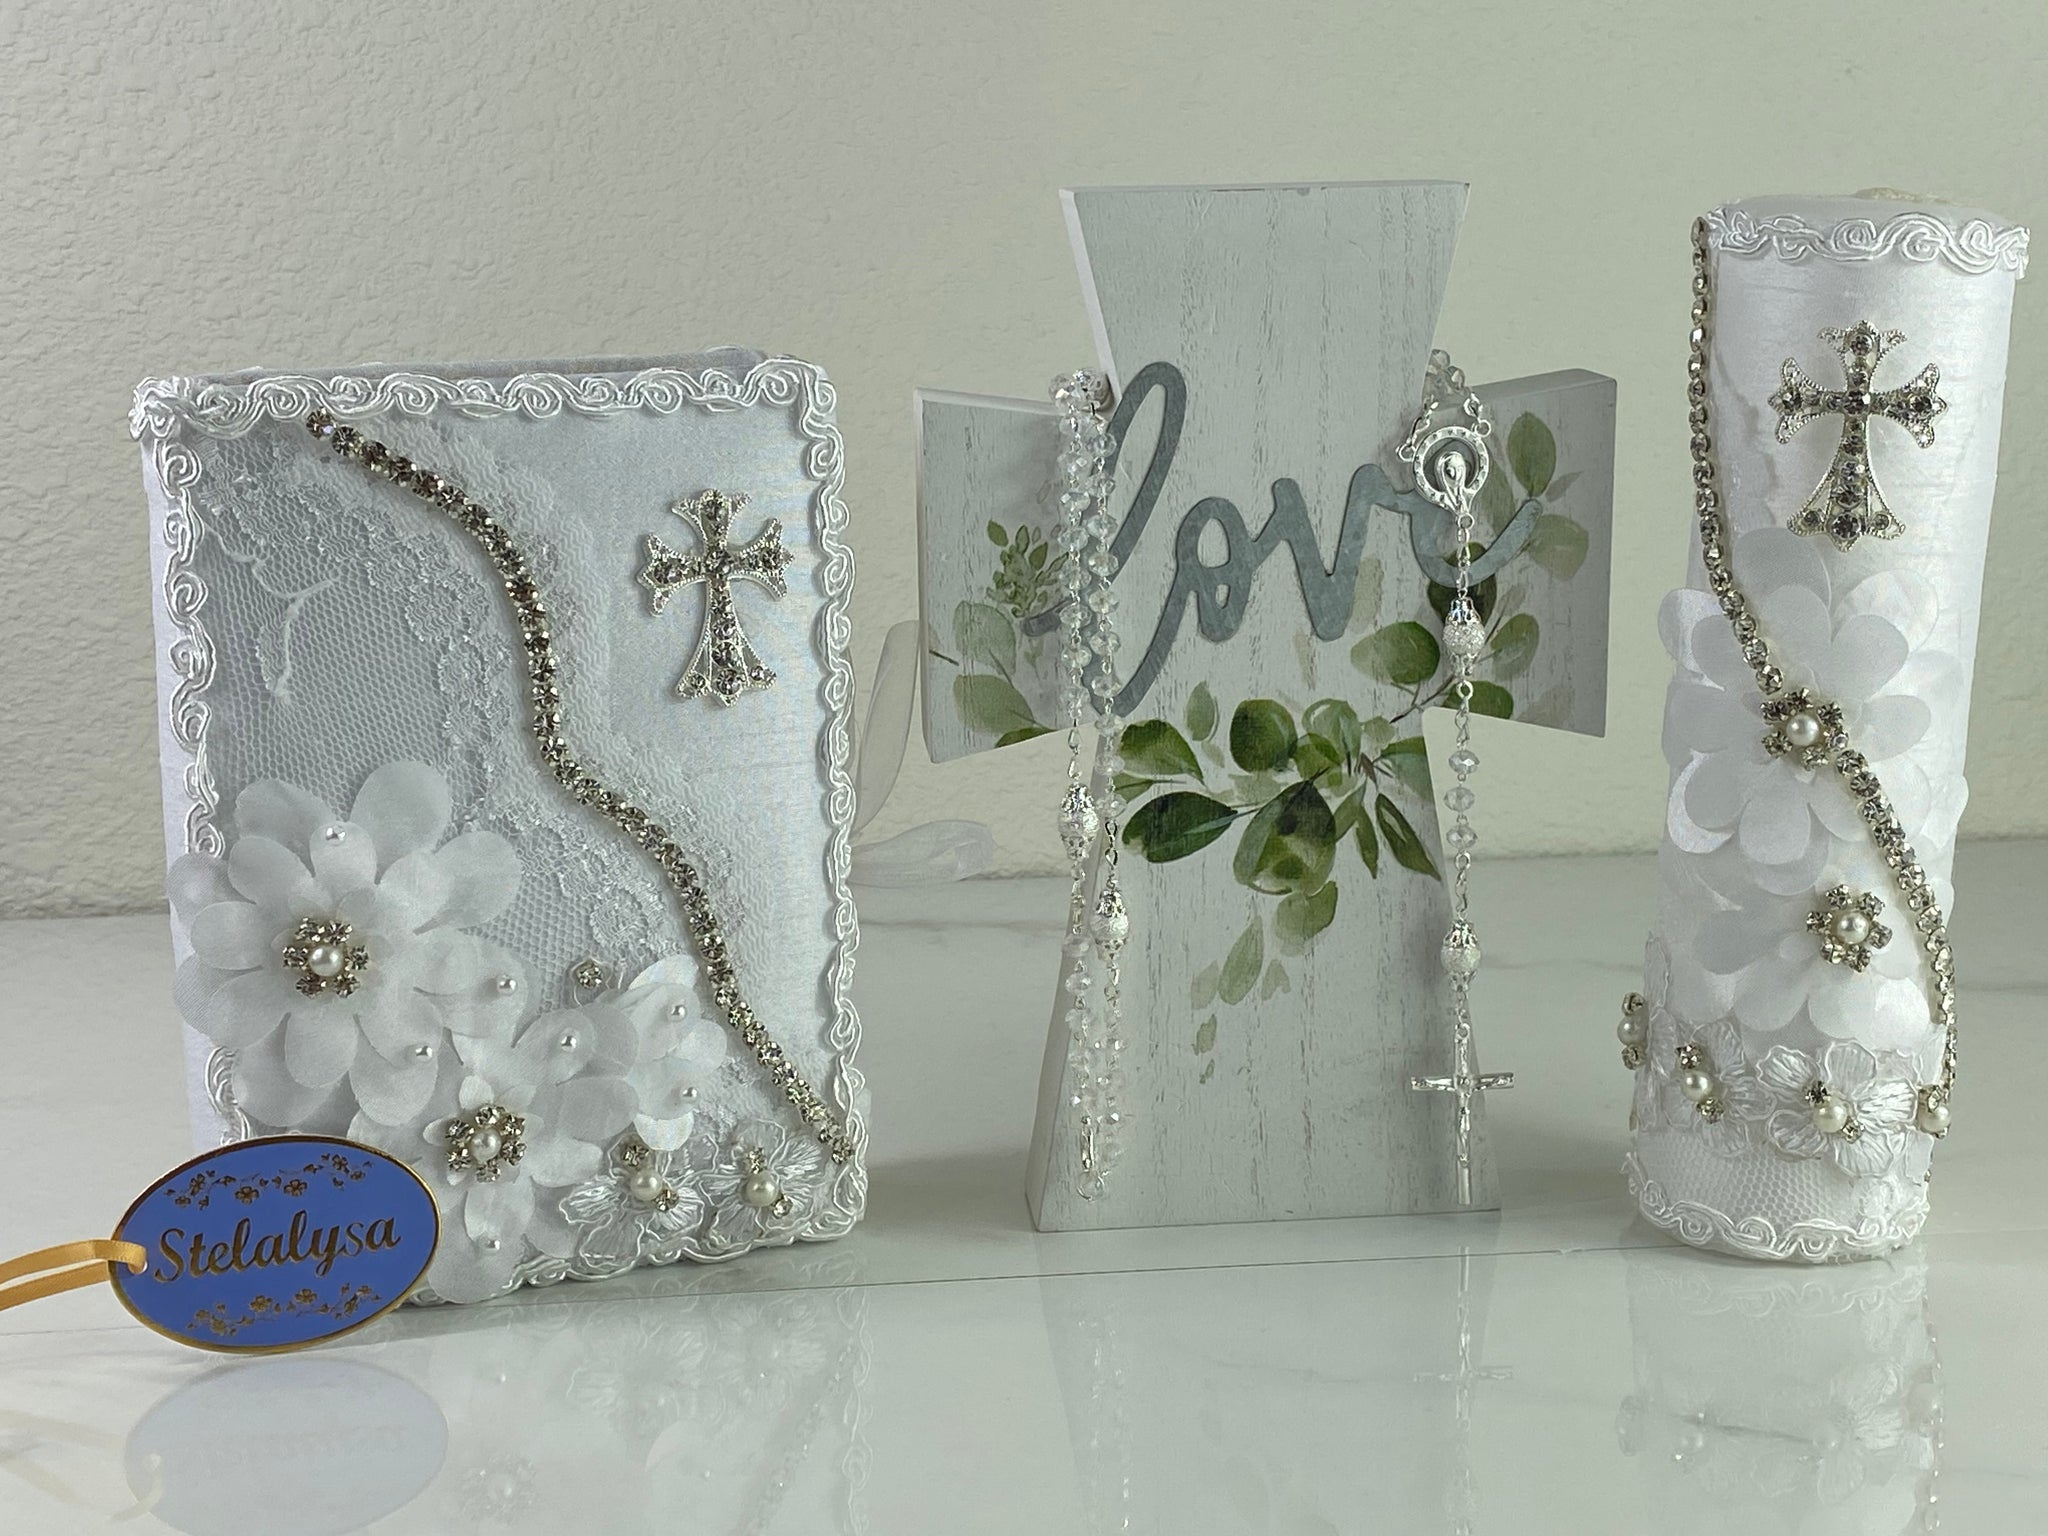 This ivory Bible Set - candle and bible is handmade and made using satin and lace.  It is elegantly designed with pearls, crystals, flowers and beads.  Each piece has a beautiful cross.   An elegant rosary complements this set.  The candle is cylinder in shape. The rosary is 16.5 in. long and Bible is 6.5 in. by 4.5 in. and the candles approximately the same height.  The Bible includes the Old and New Testament in English. 